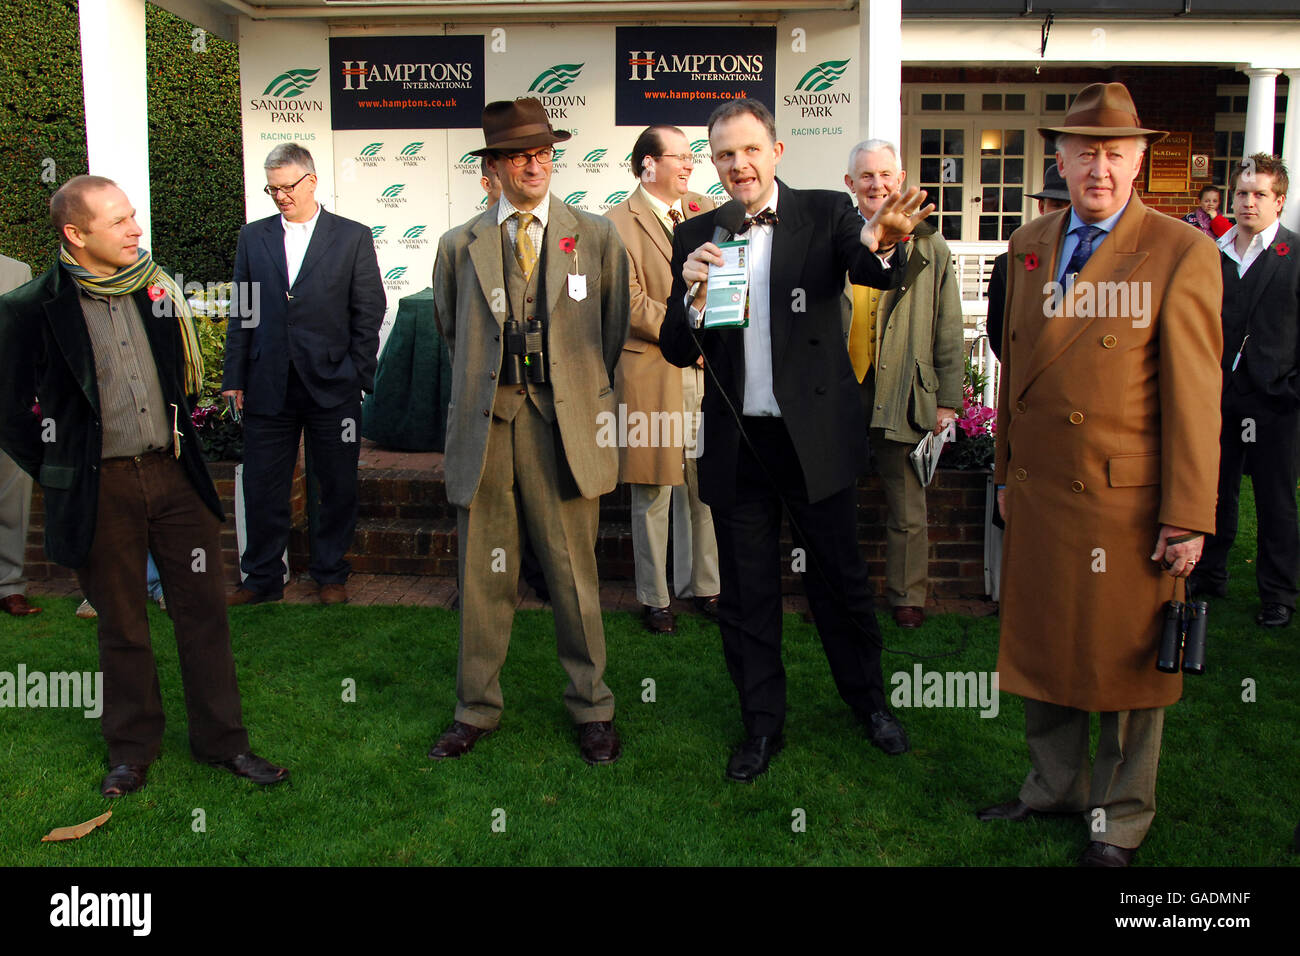 Racegoers take part in competitions, as part of Gentlemen's Day at Sandown Stock Photo